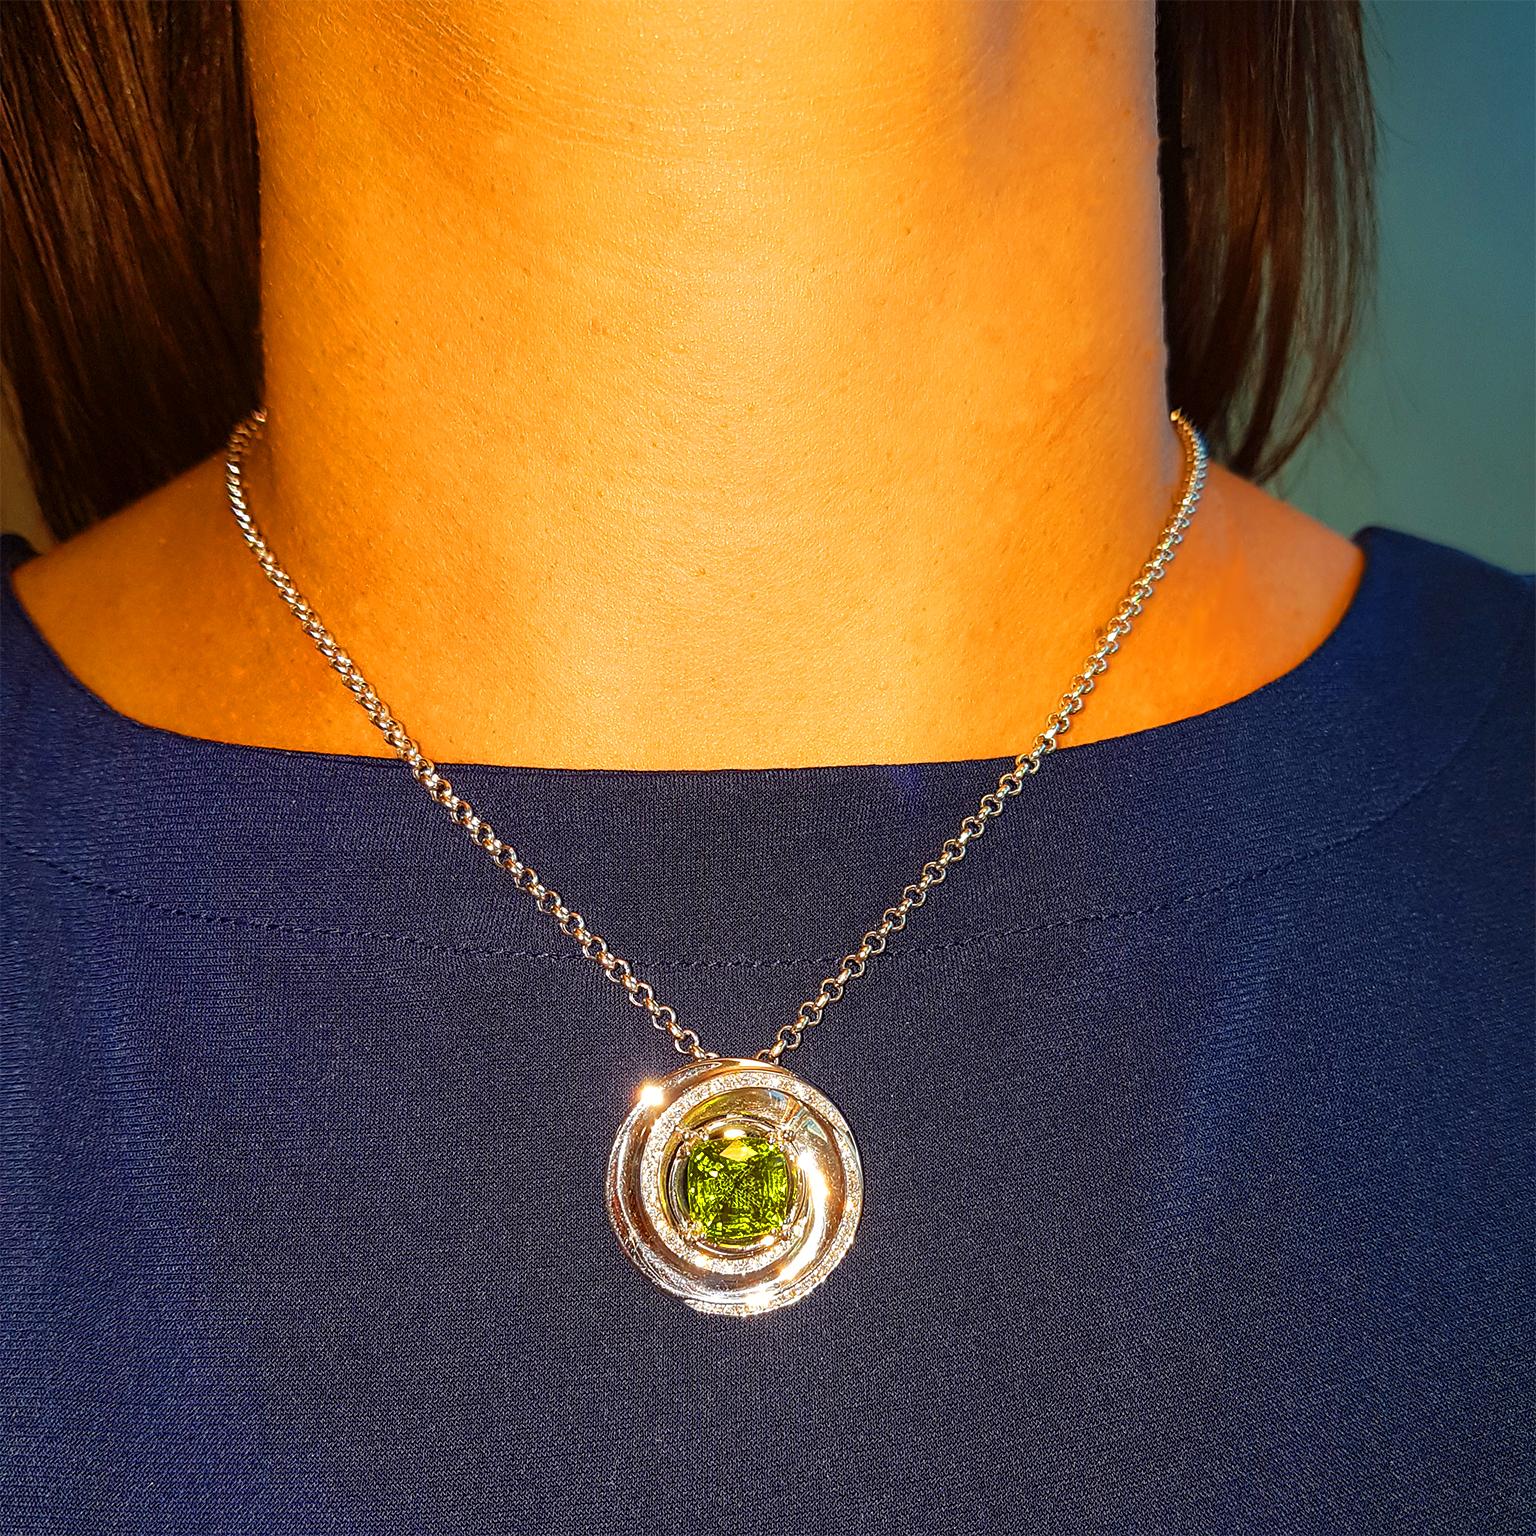 PERFECT PERIDOT! 

This magnificent designer pendant has been crafted in 18ct White Gold and set with a swirling blaze of fine diamonds (1.62ct G-VS) & a gorgeous opulent olivine 5.34ct Peridot gemstone. 

One-off & Exclusive! 
Standard 18ct 18 inch